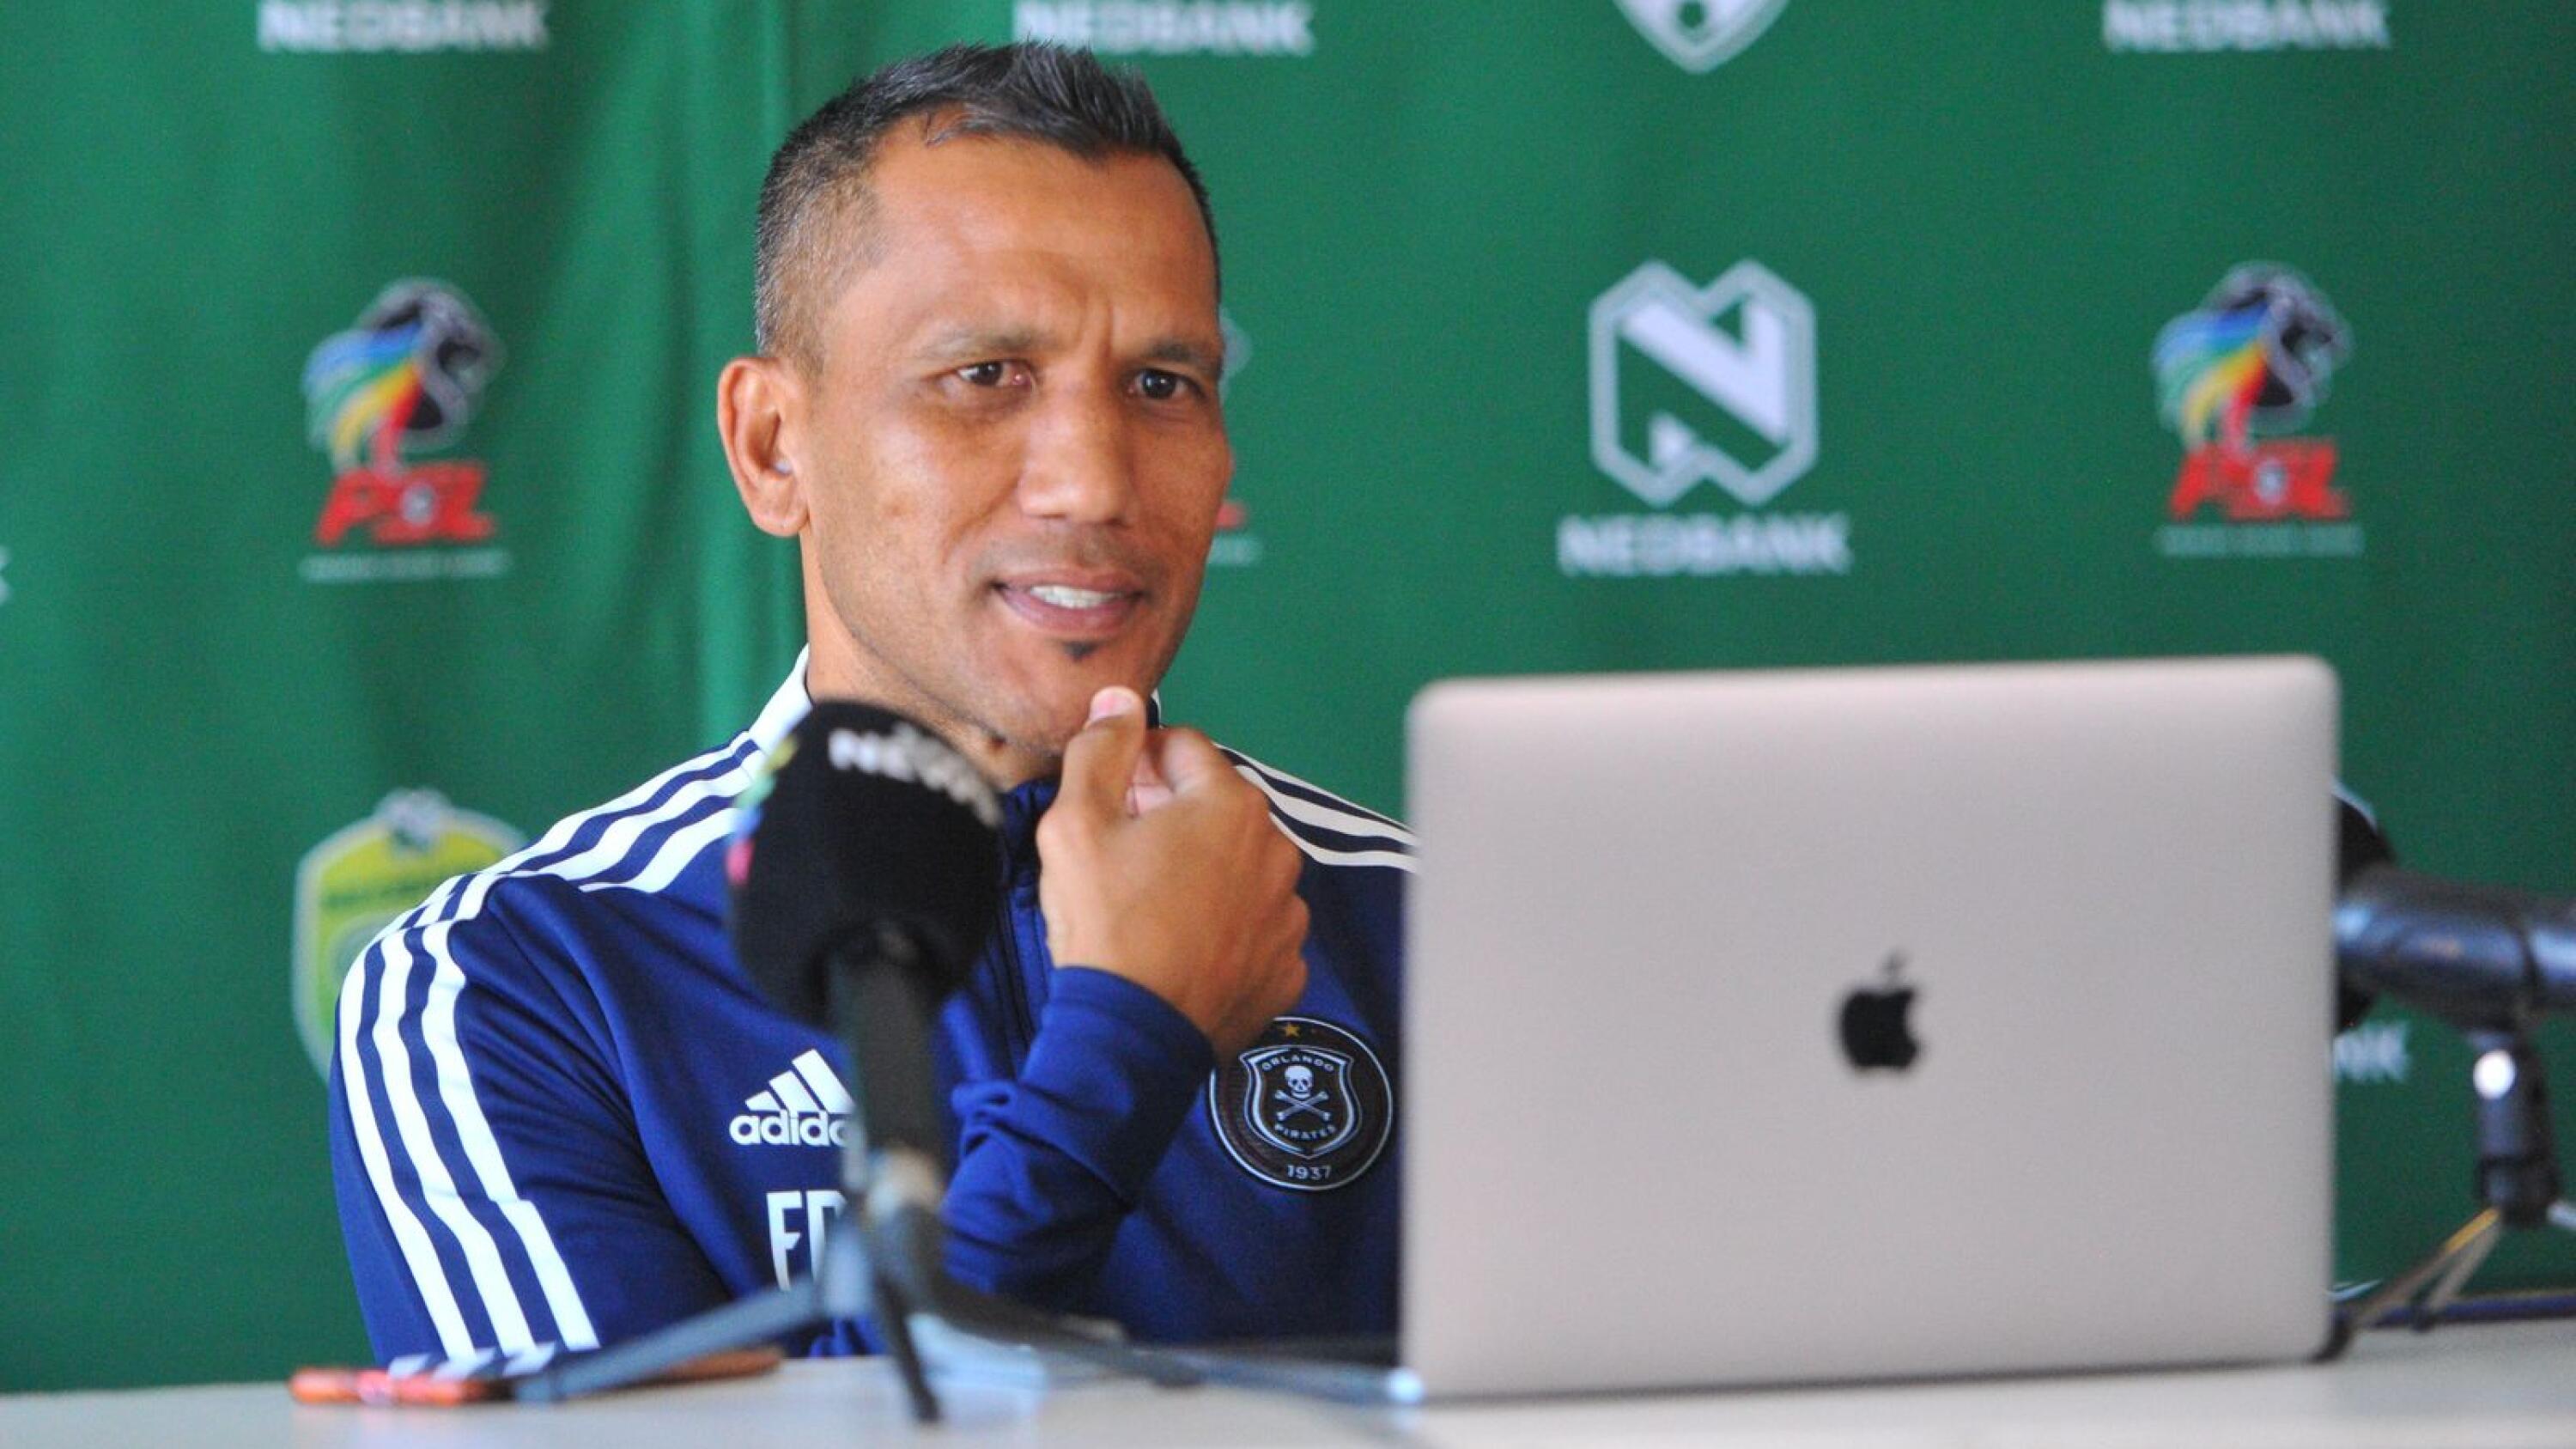 Orlando Pirates co-coach Fadlu Davids speaks to the media during a press conference ahead of their Nedbank Cup clash against Marumo Gallants